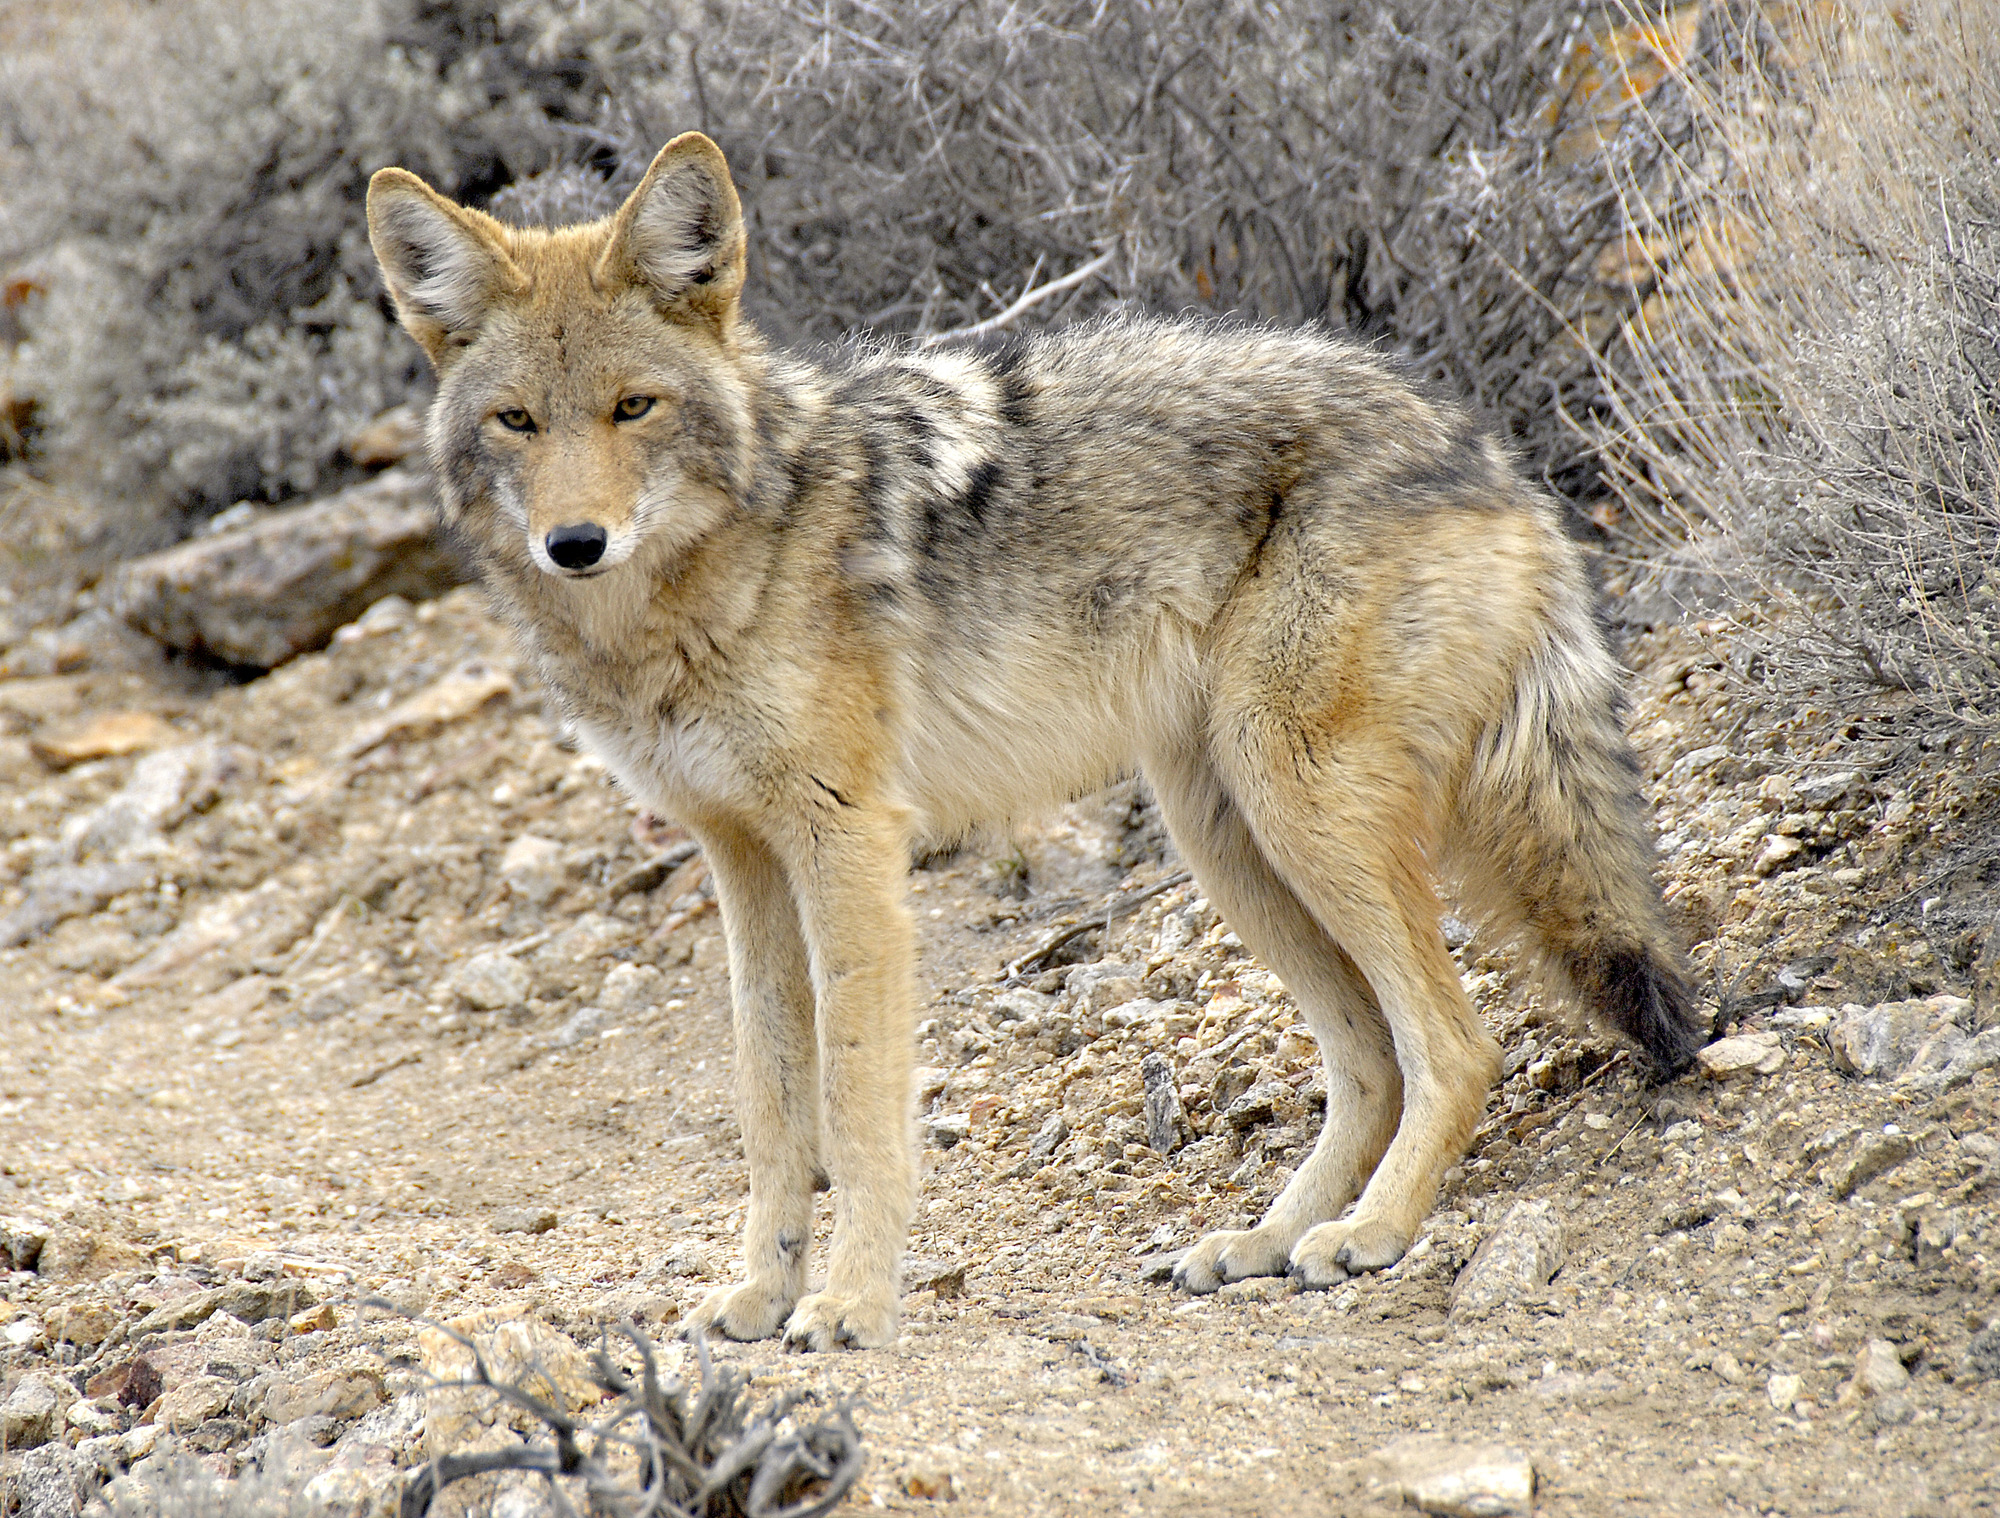 A coyote stands near brush.